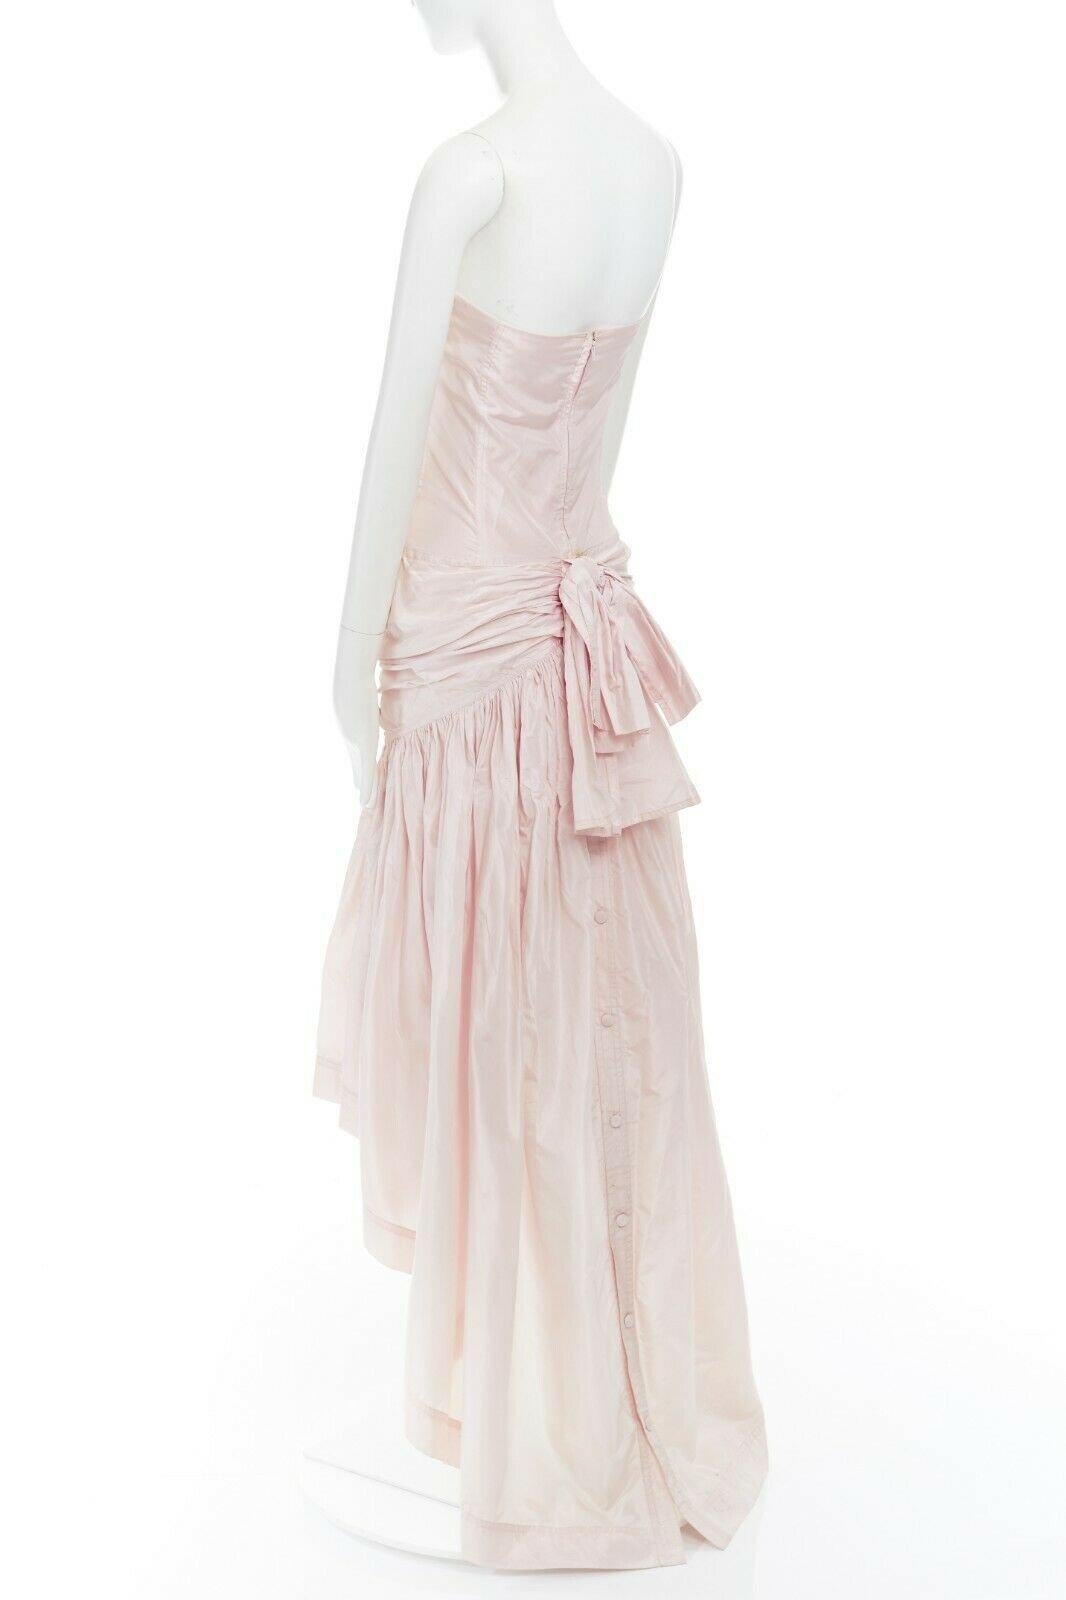 Women's ANGELO TARLAZZI light pink boned corset strapless ruched bow back high low dress